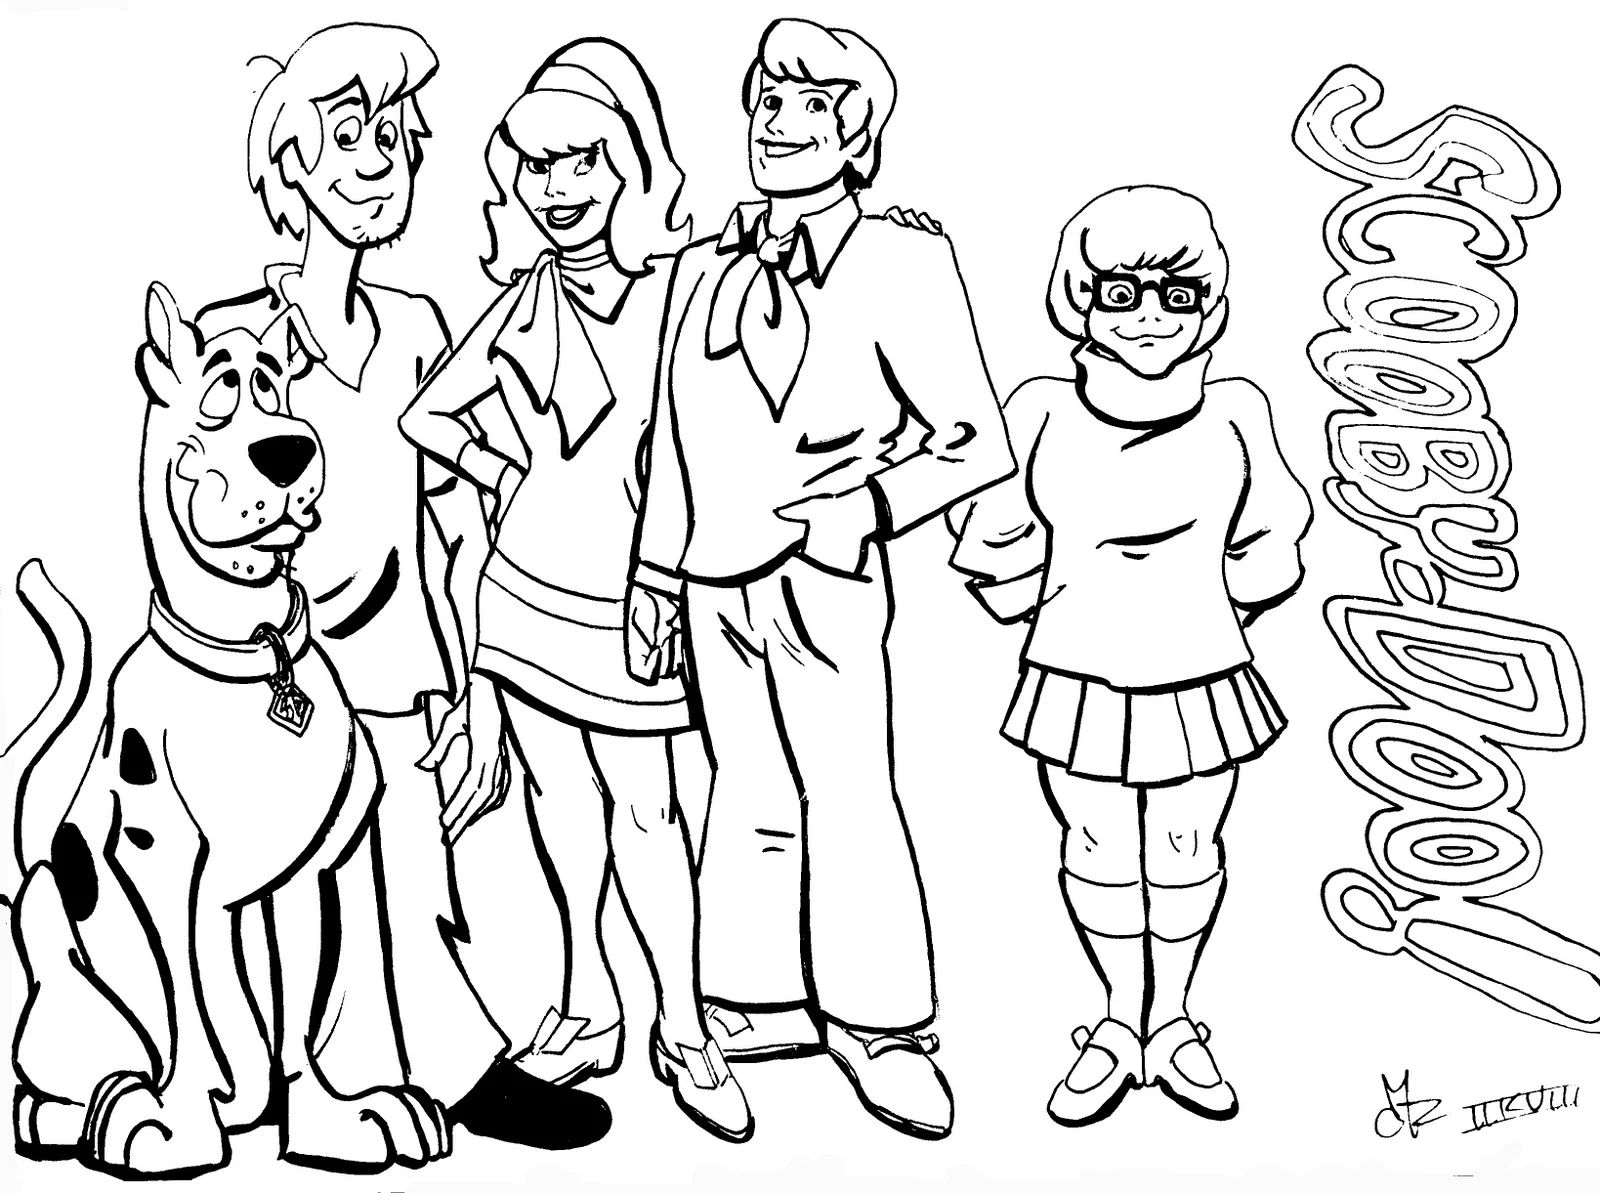 Scooby Doo Coloring Pages Pdf (15 Image)